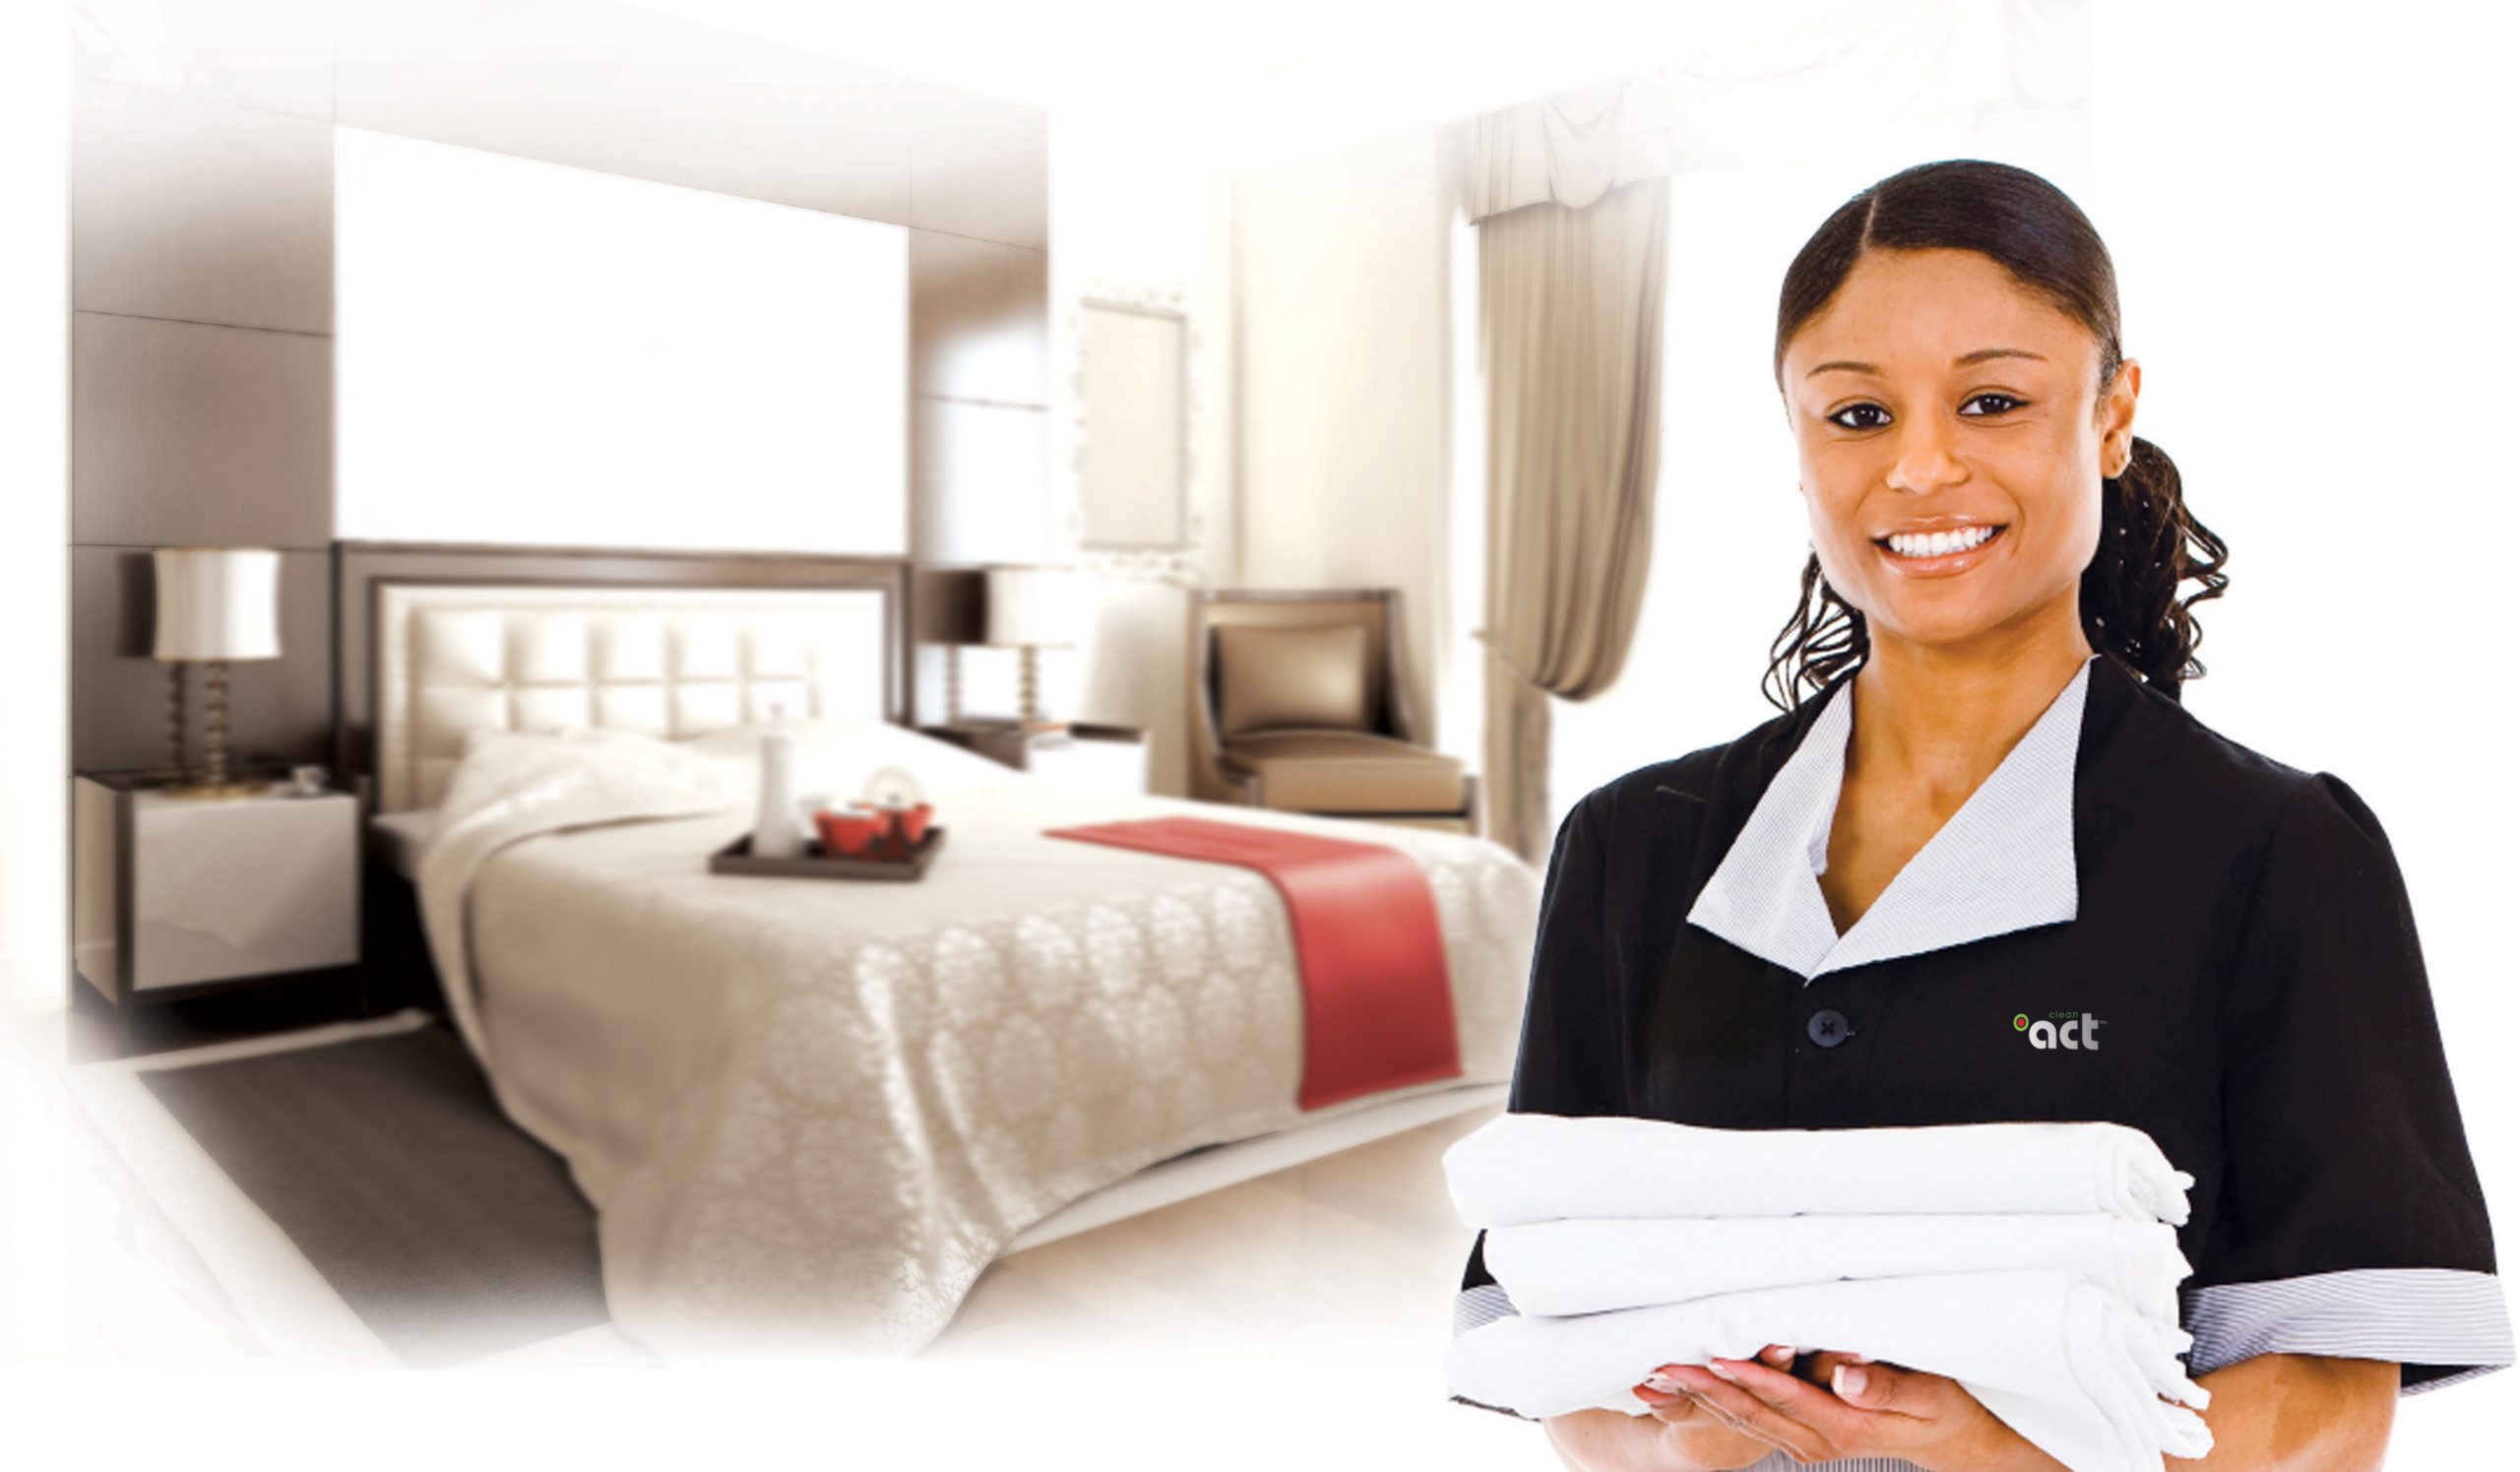 Beautiful hotel room with a beautiful woman smiling holding a wite towel